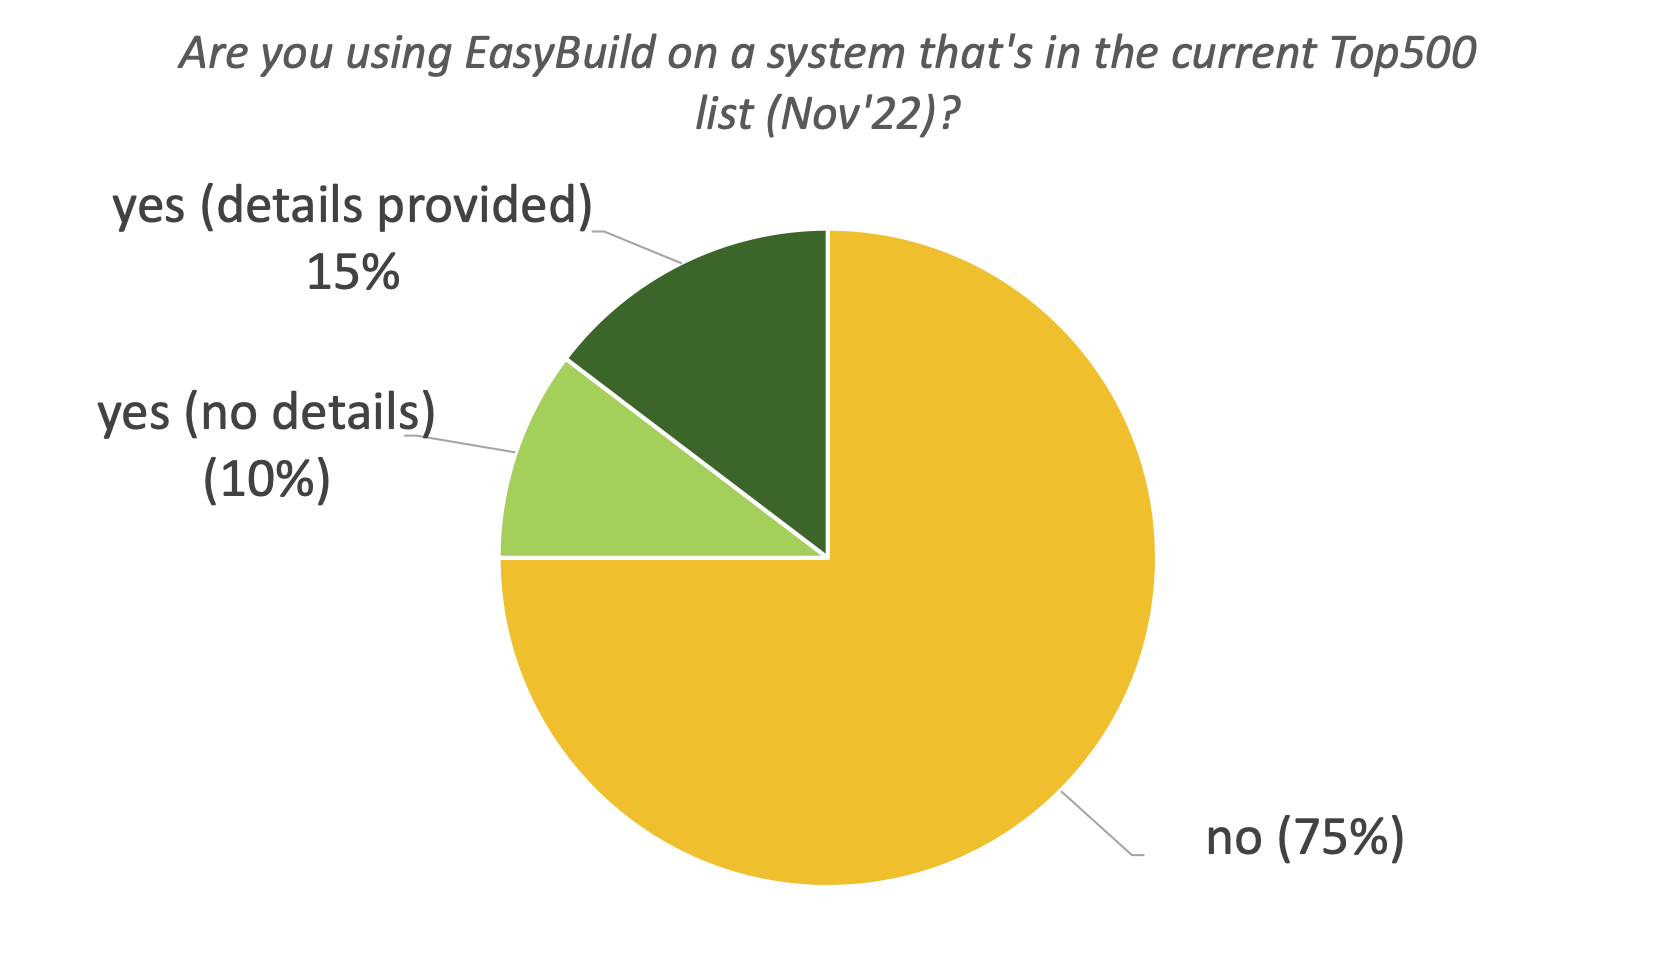 17. Are you using EasyBuild on a system that's in the current Top500 list (Nov'22)?